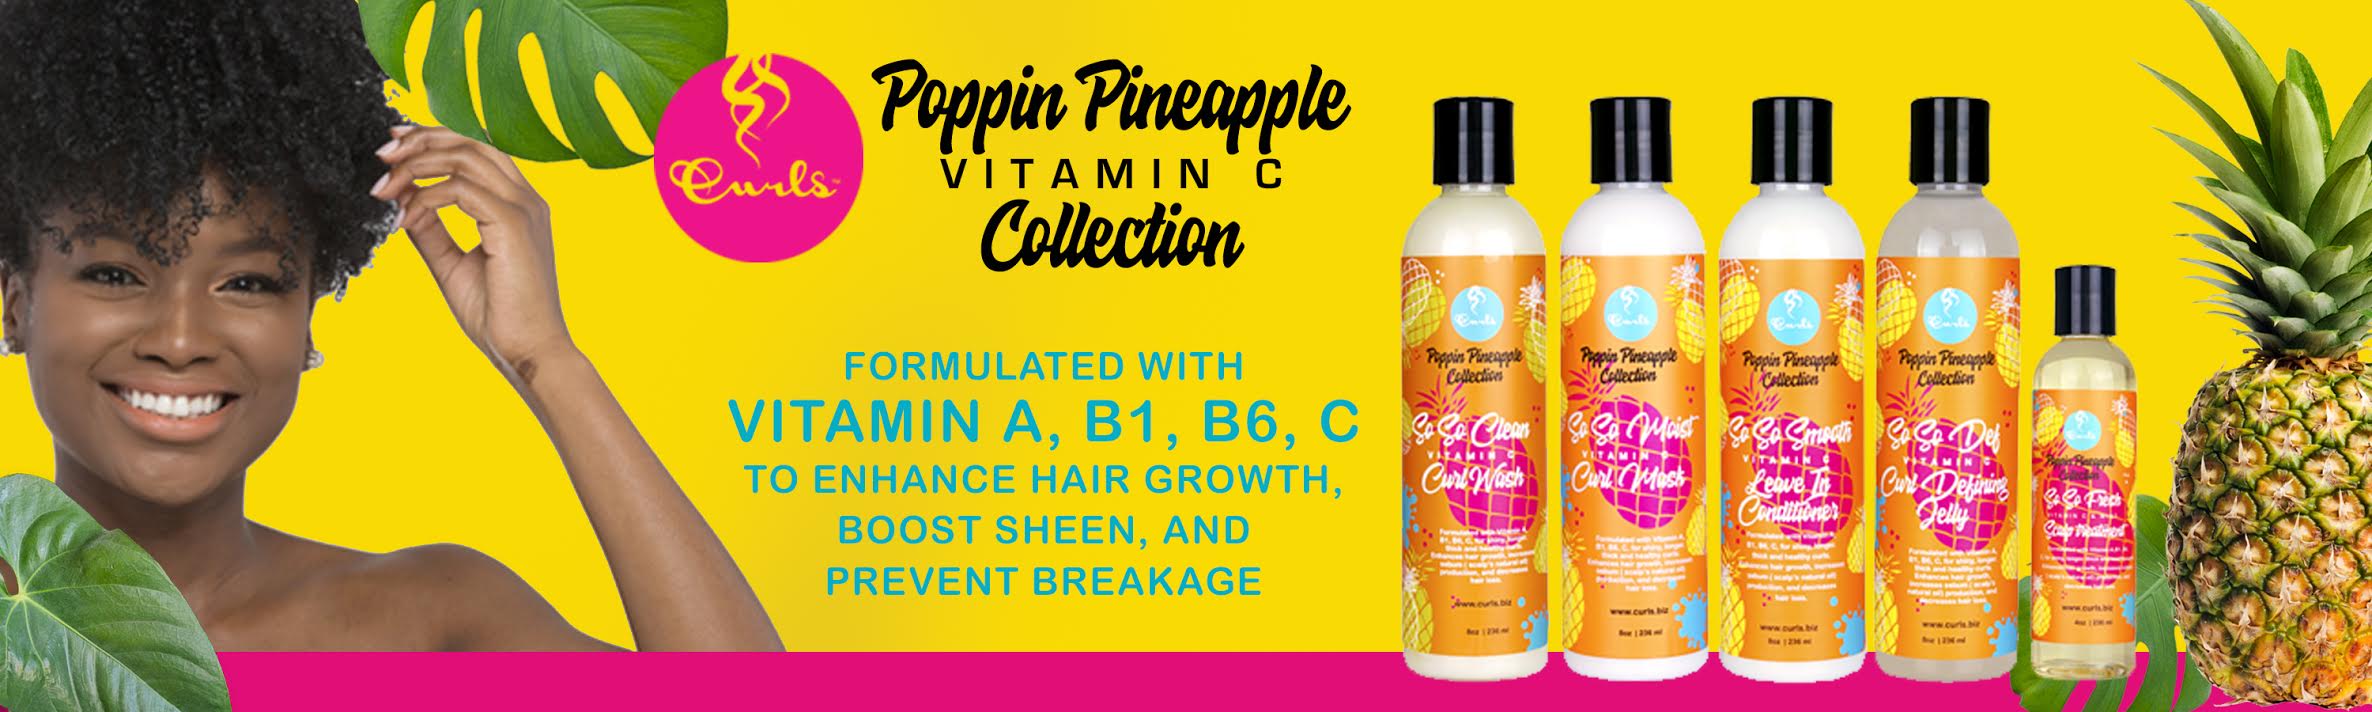 Curls Poppin Pineapple Vitamin C Collection